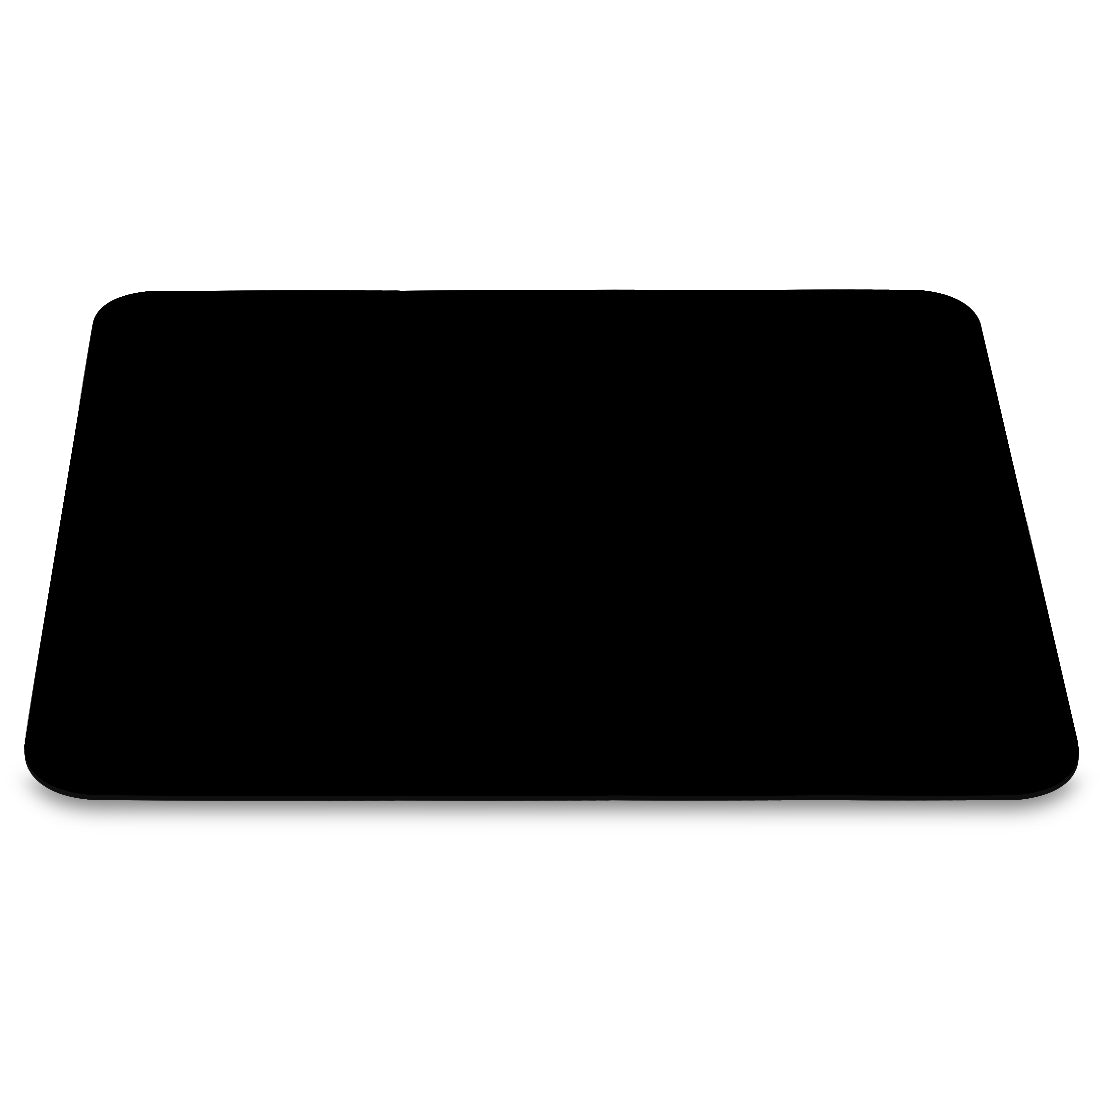 40cm Photography Acrylic Reflective Display Table Background Board (Black)